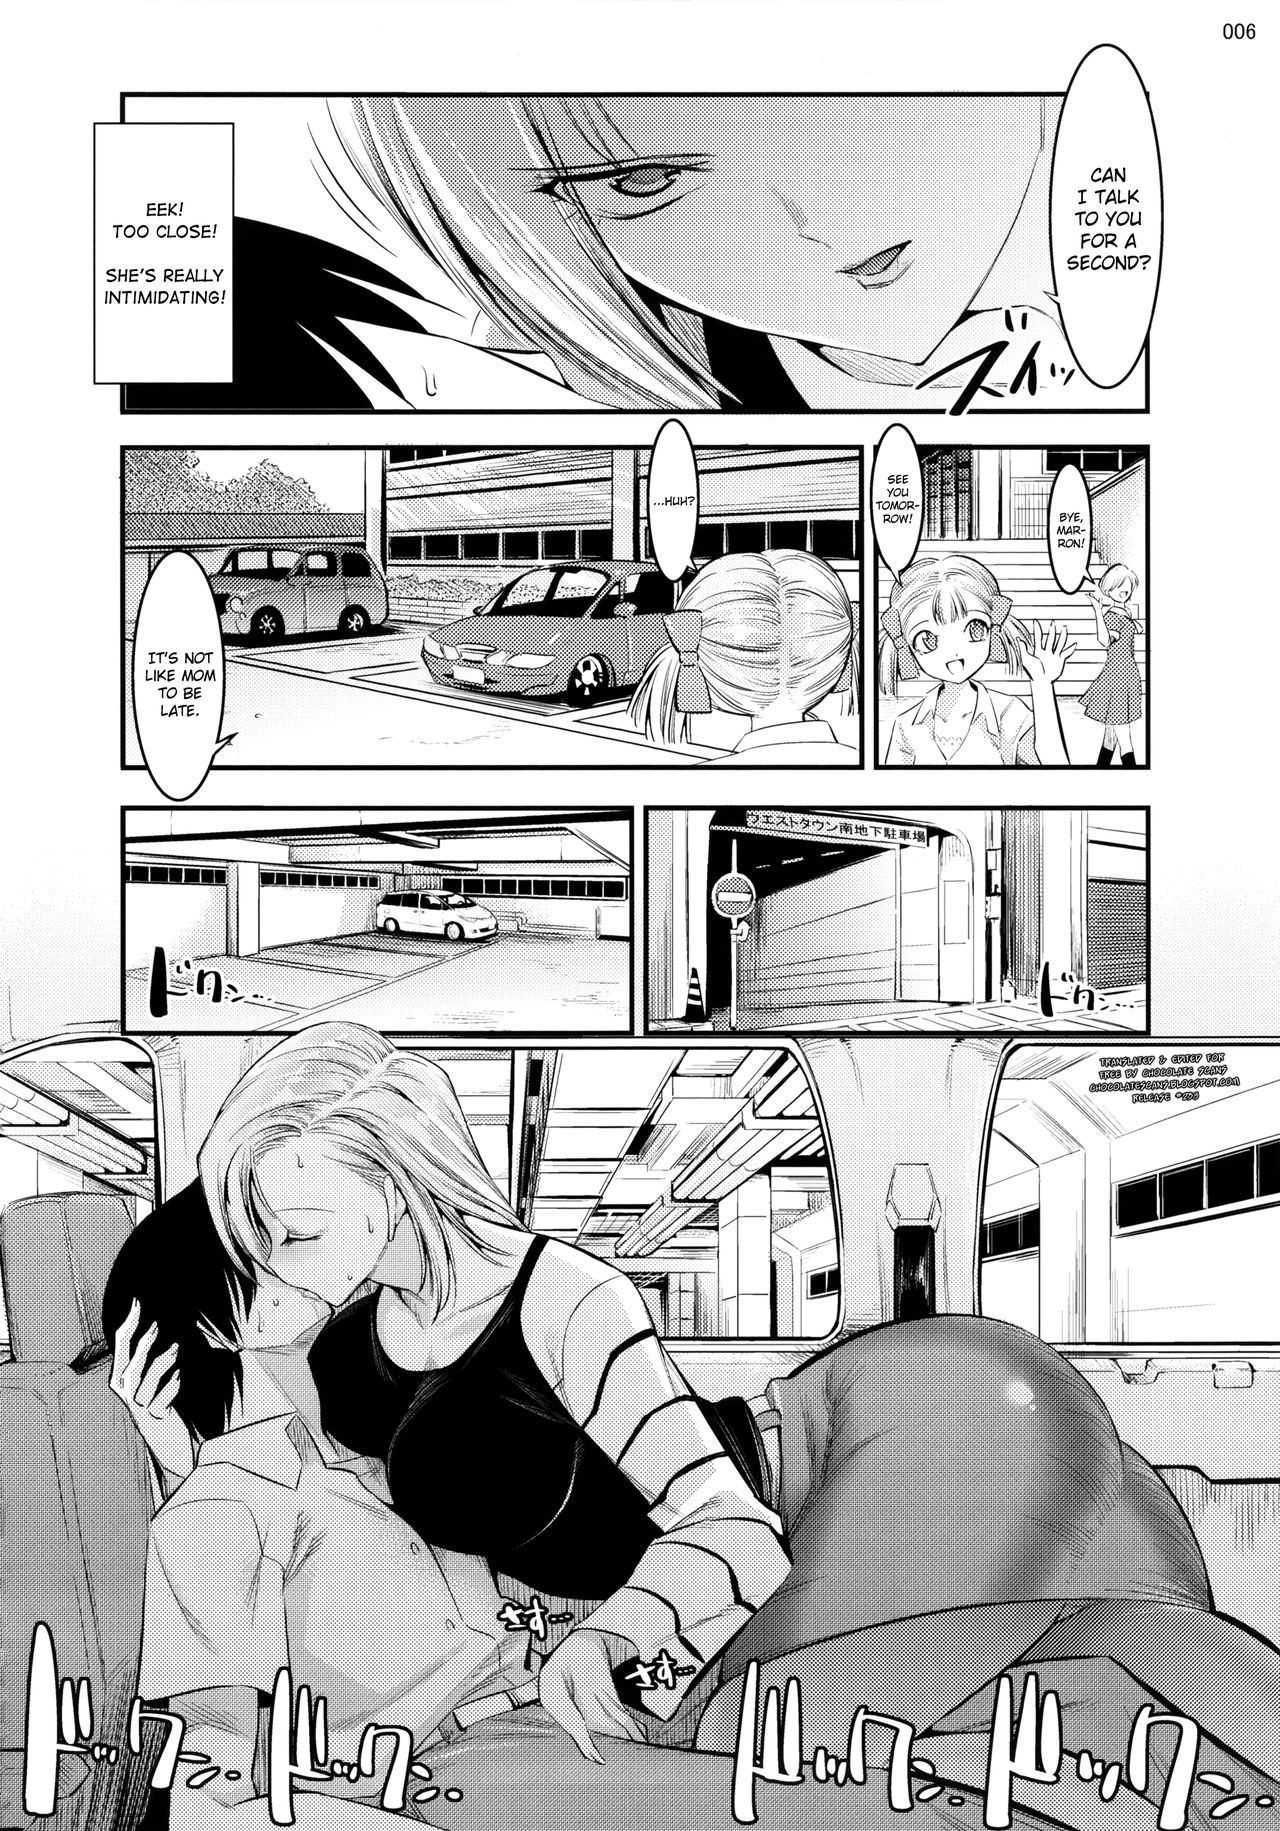 Tender First Time With Android 18 Porn Comic english 05